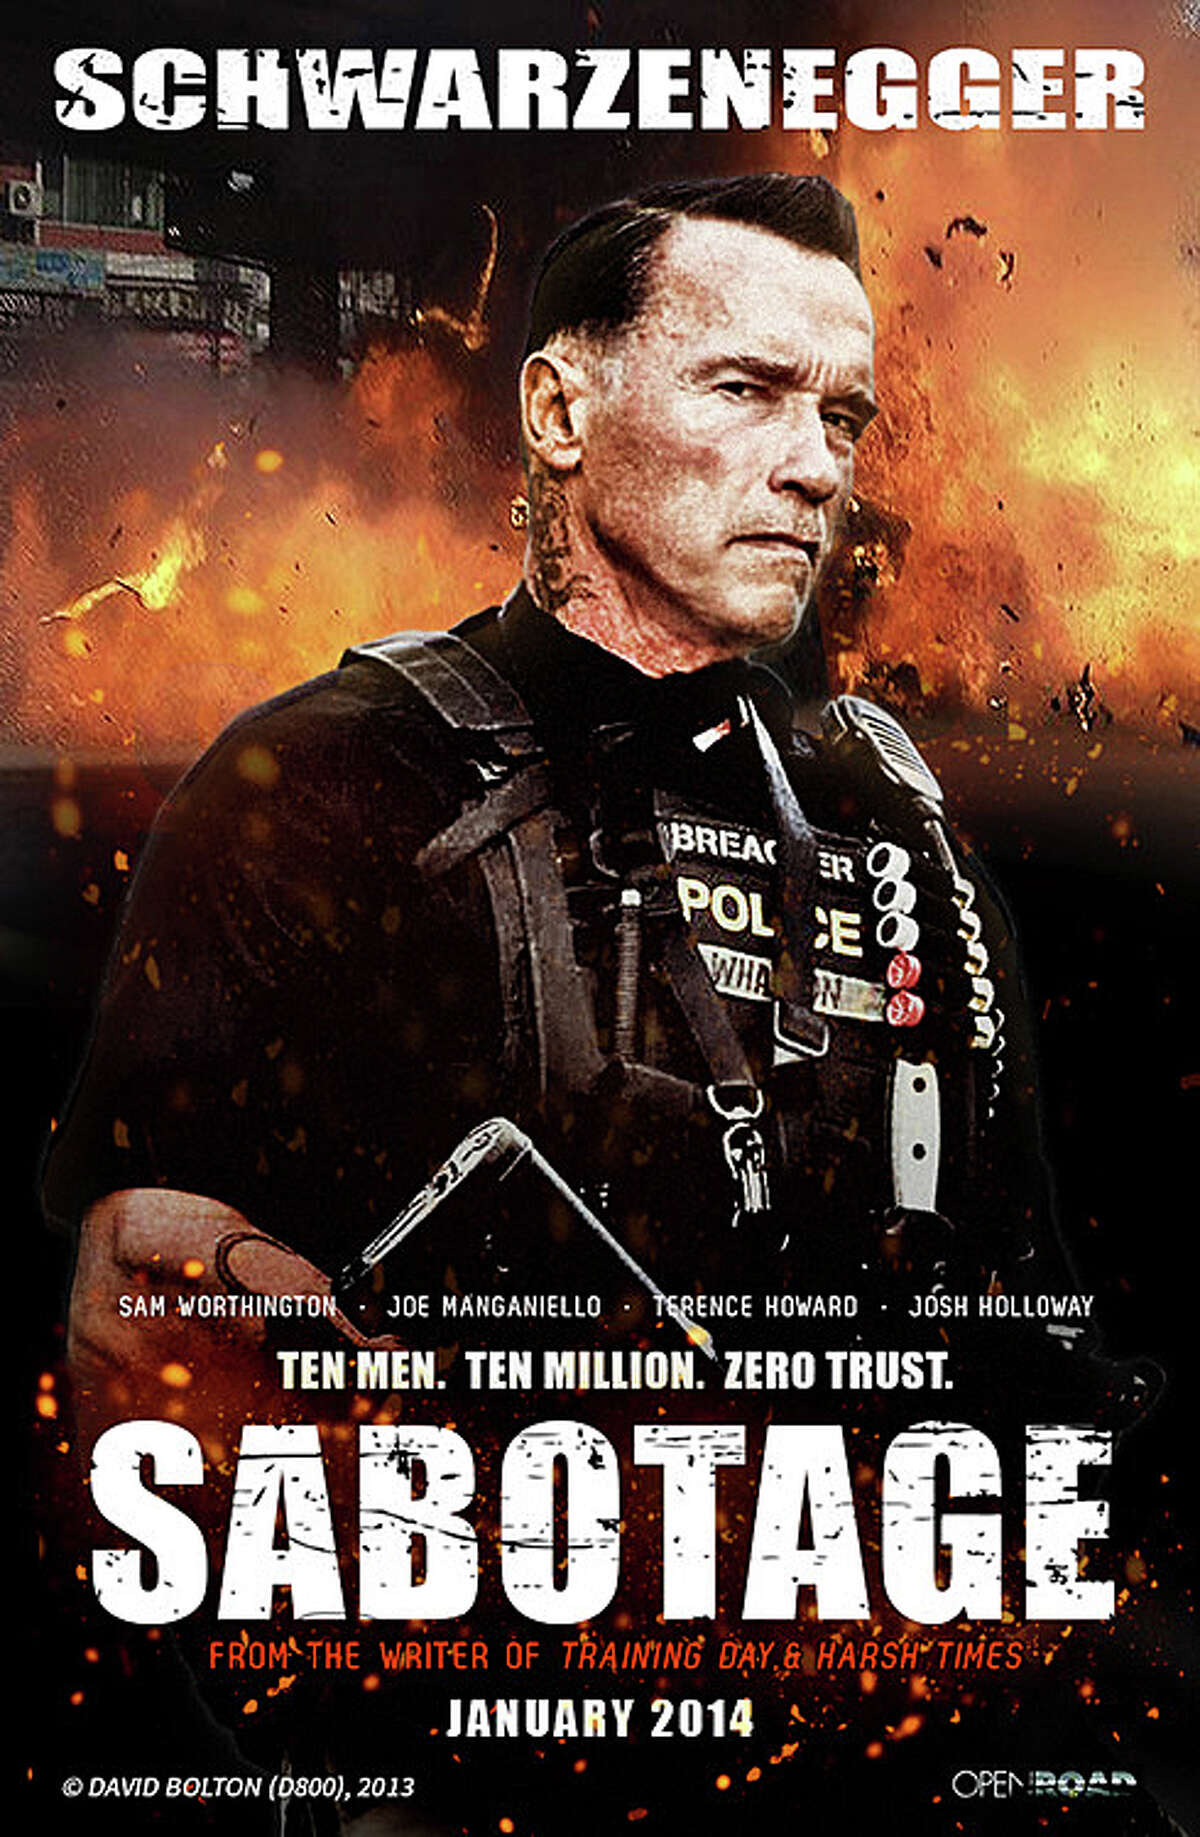 Arnold Schwarzenegger, in another post-gubernatorial film outing, is a DEA agent in "Sabotage" who is caught up in a brutal re-interpretation of an Agatha Christie mystery.